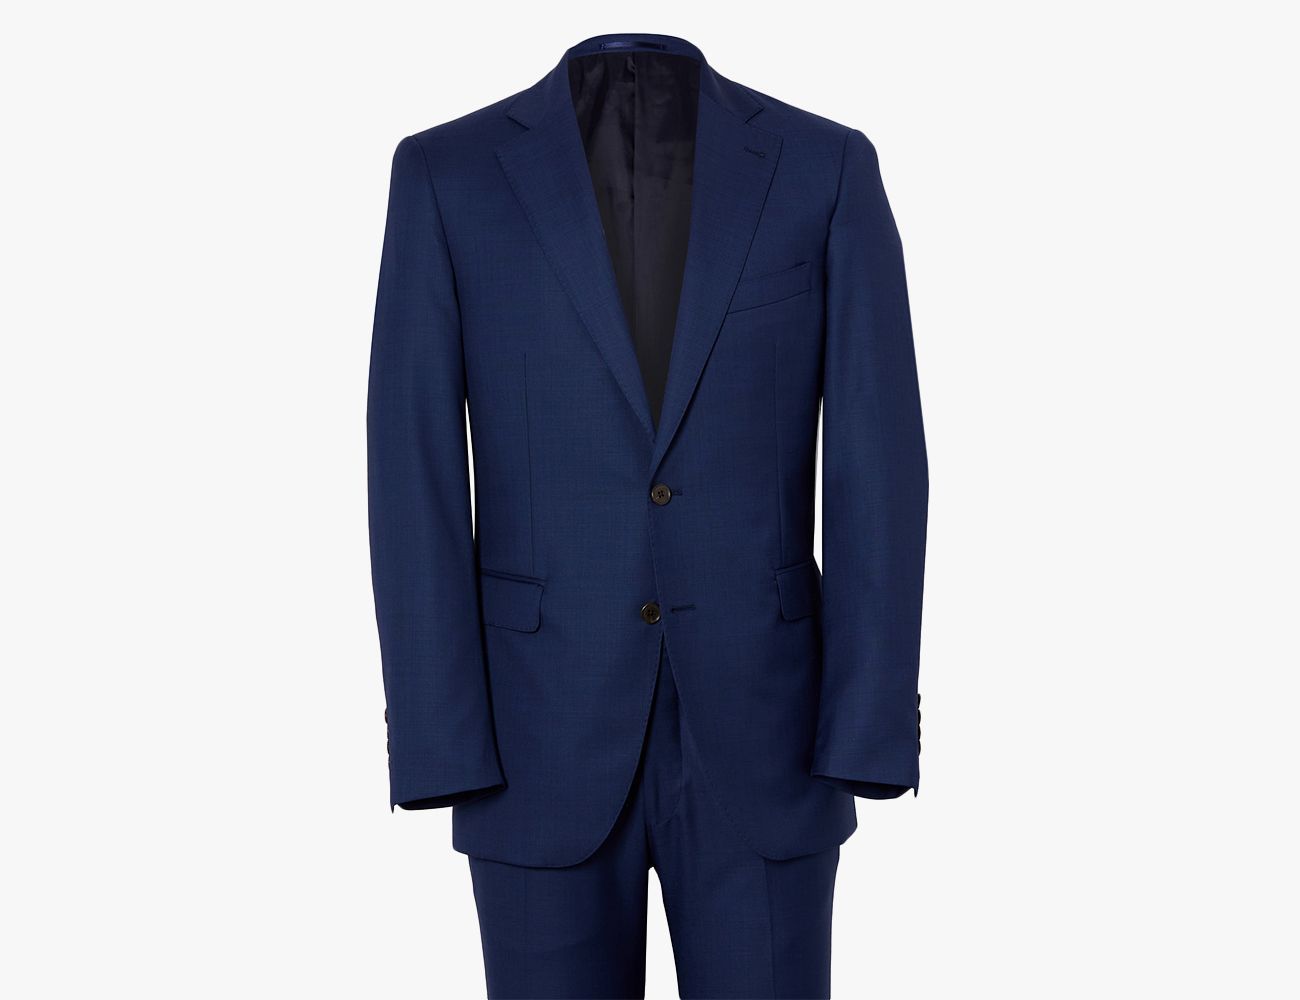 Alton Lane Review: A Made-to-Measure Suit for an Off-the-Shelf Price